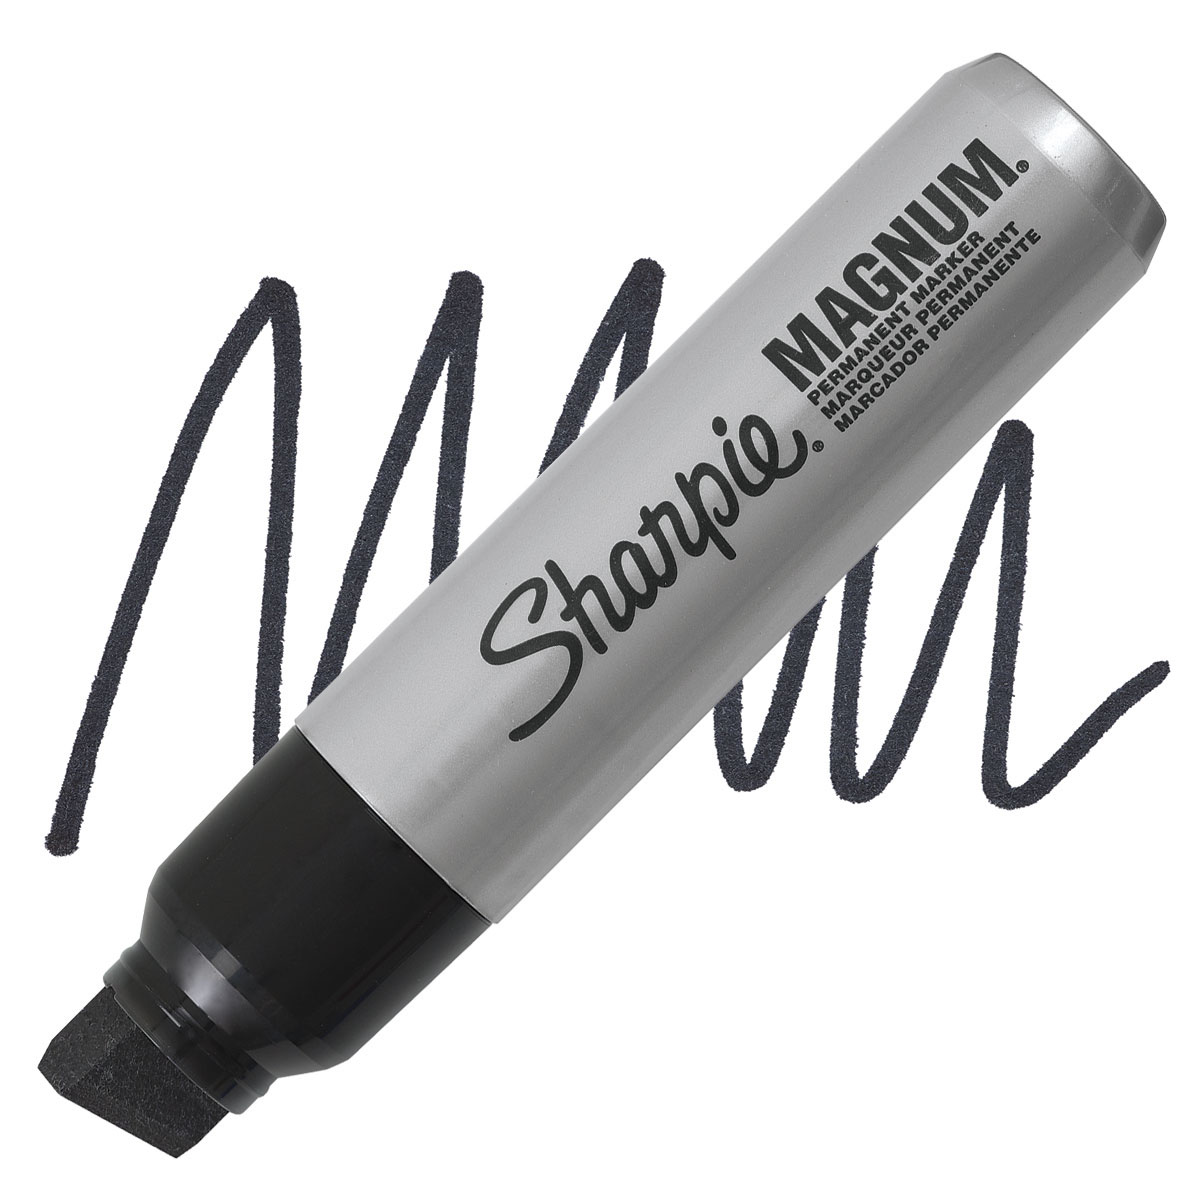 Sharpe Mfg Co Sharpie 059241 Magnum Non-Toxic Ink Xylene-Free Permanent  Marker; 0.62 In. Jumbo Chisel Tip; Red 59241